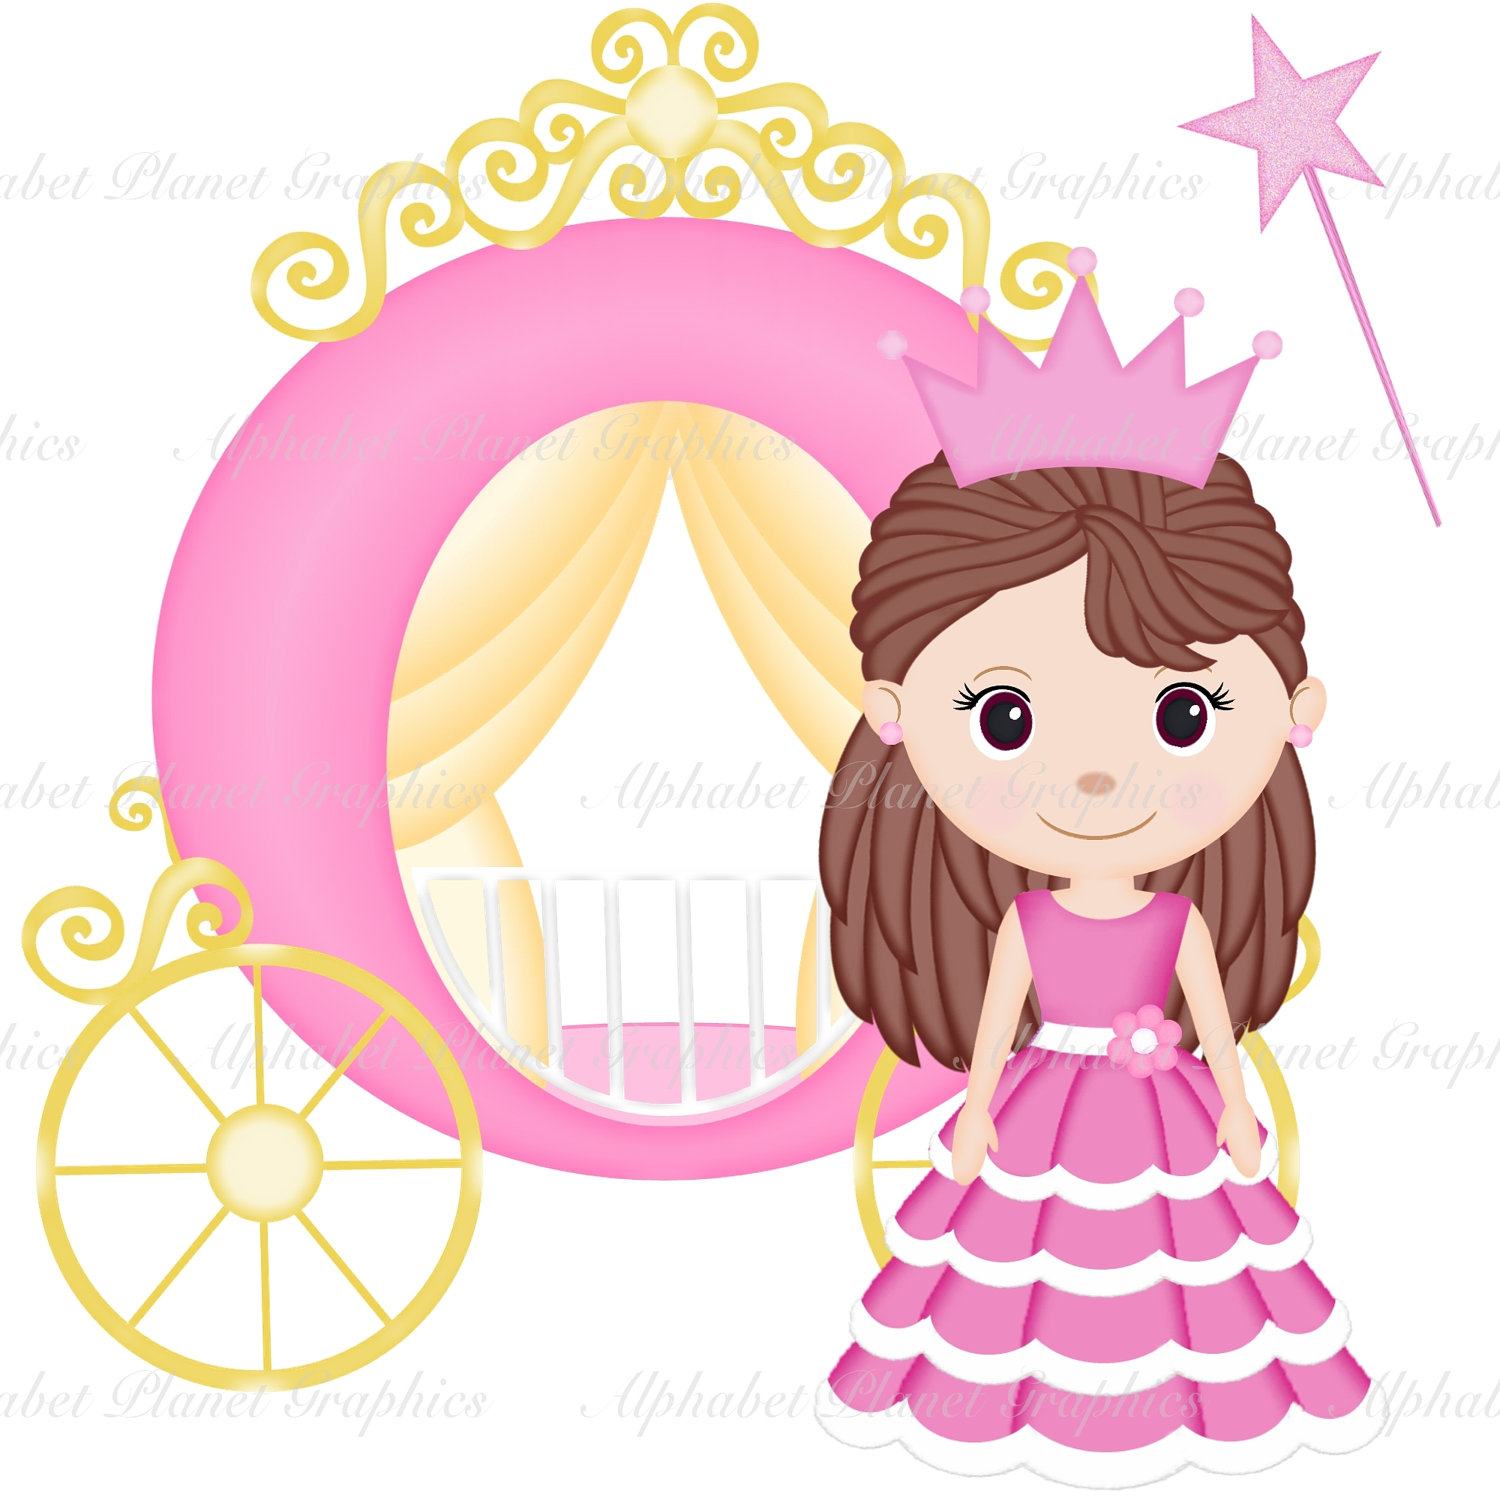 Free princess clipart the cliparts 2